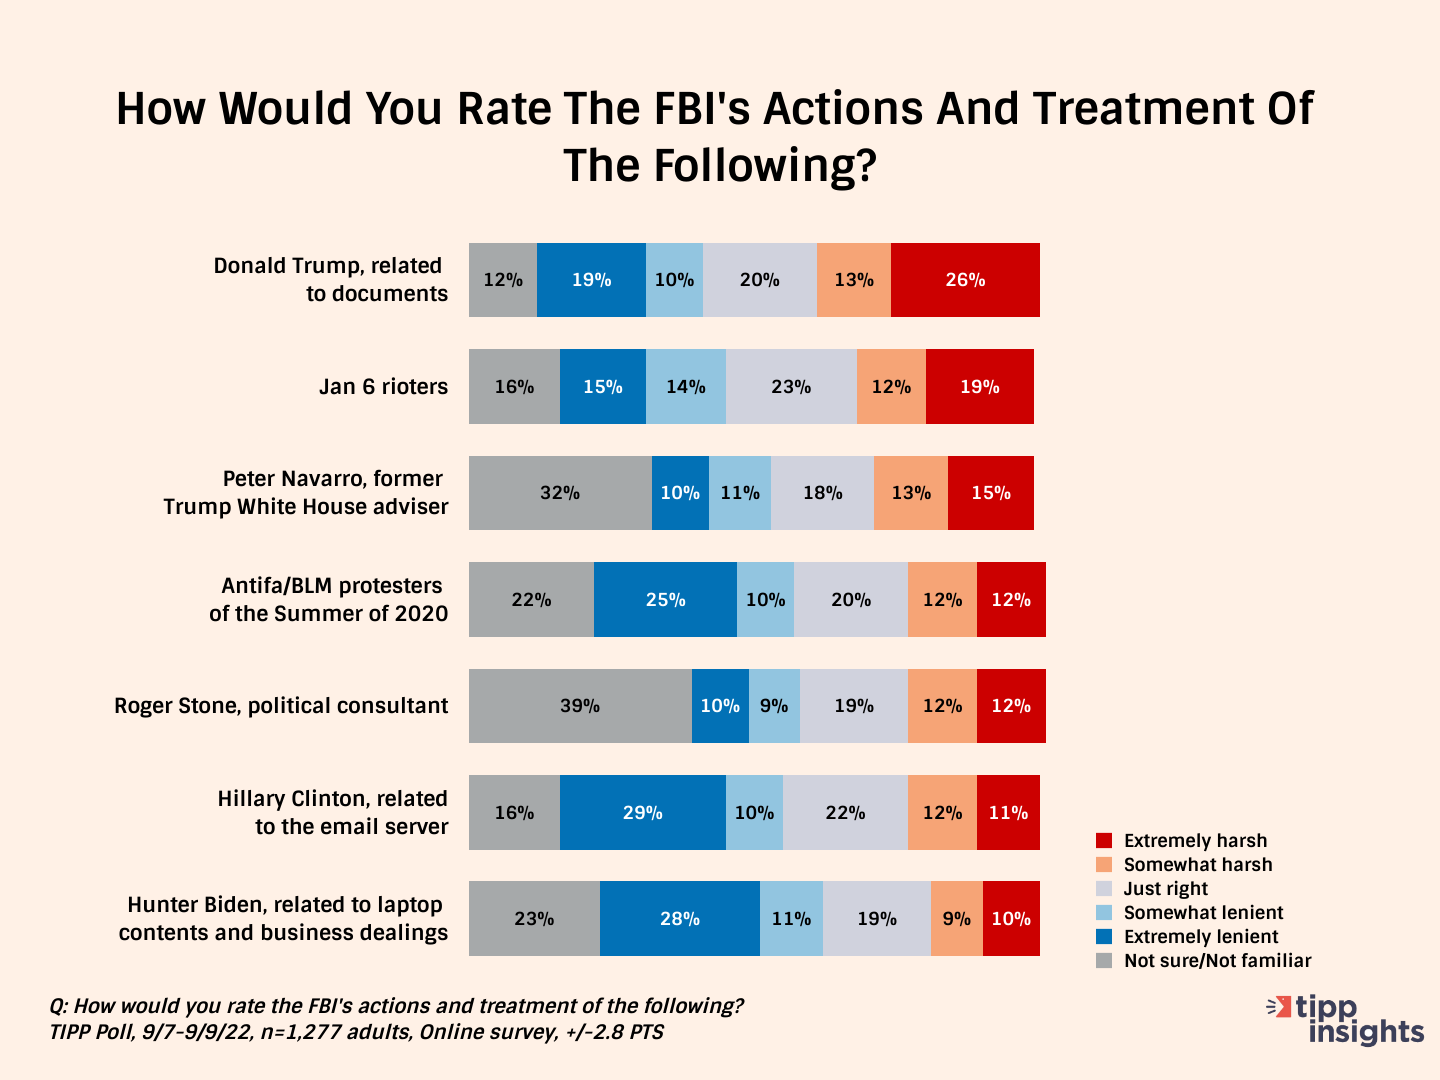 TIPP Poll Results: How do American's rate the FBI's actions and treatment of the following: Donald Trump documents, January 6th rioters, Antifa/BLM protestors, Roger Stone, Hillary Clinton email server, Hunter Biden laptop contents